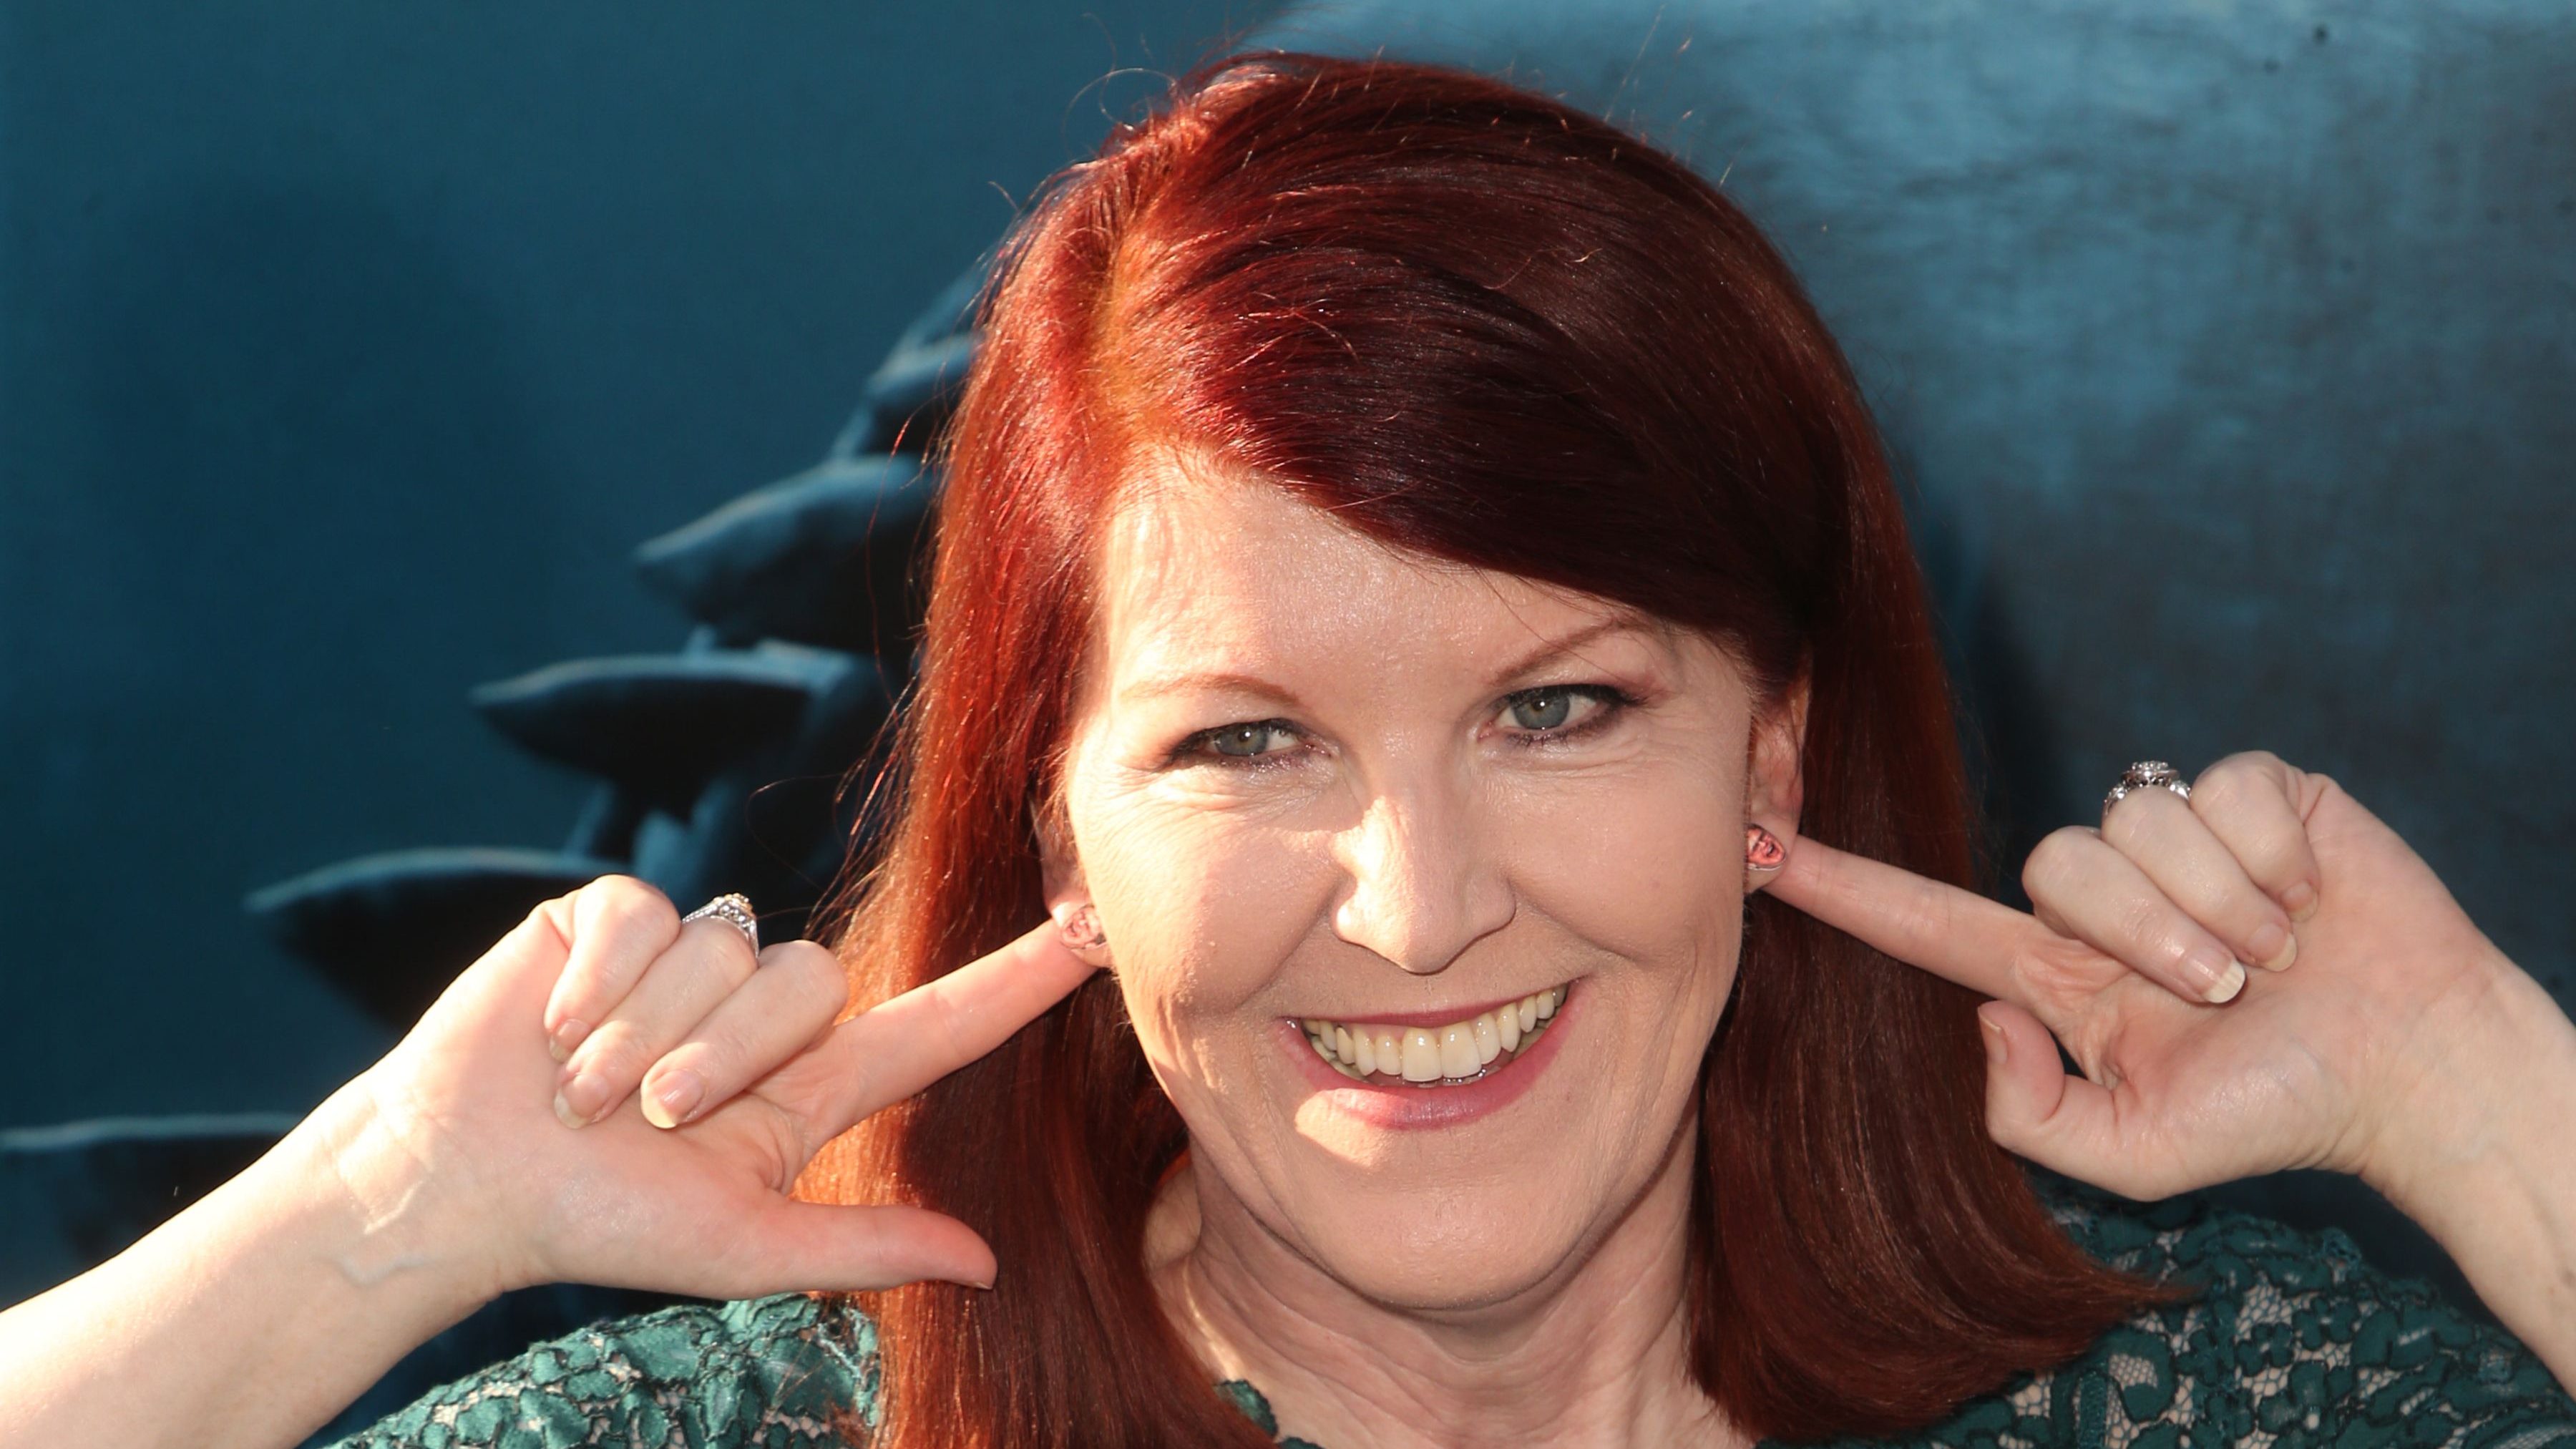 'Dancing With the Stars' 2019 Kate Flannery Talks Biggest Strength